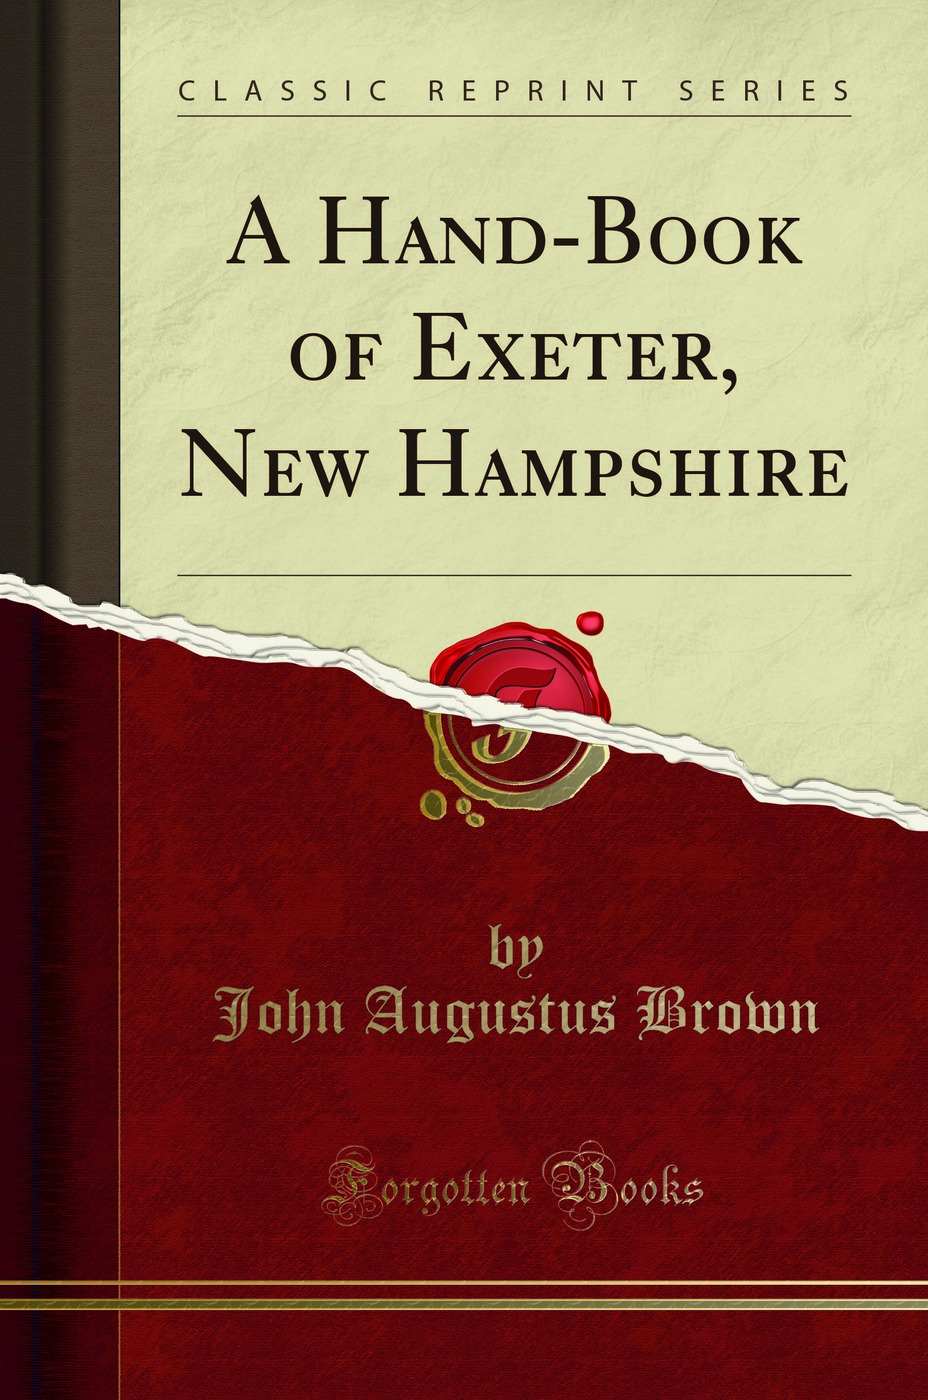 A Hand-Book of Exeter, New Hampshire (Classic Reprint) - John Augustus Brown, Charles Henry Bell